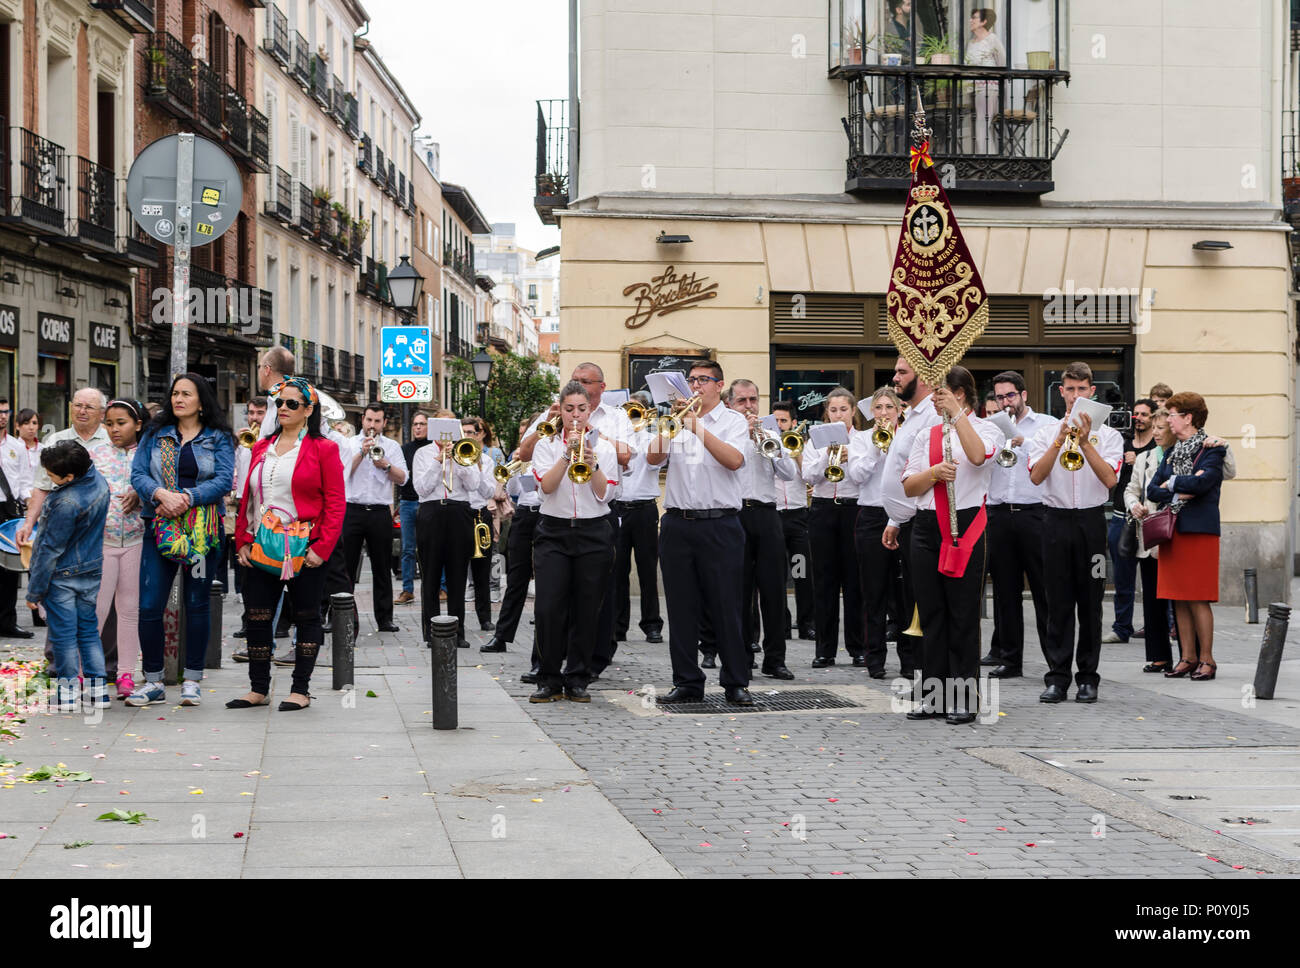 Madrid, Spain, 10 th June, 2018. A view of San Ildefonso procession in Malasaña quarter with musicians. Madrid, Spain on 10 th June 2018. Credit: Enrique davó/Alamy Live News. Stock Photo